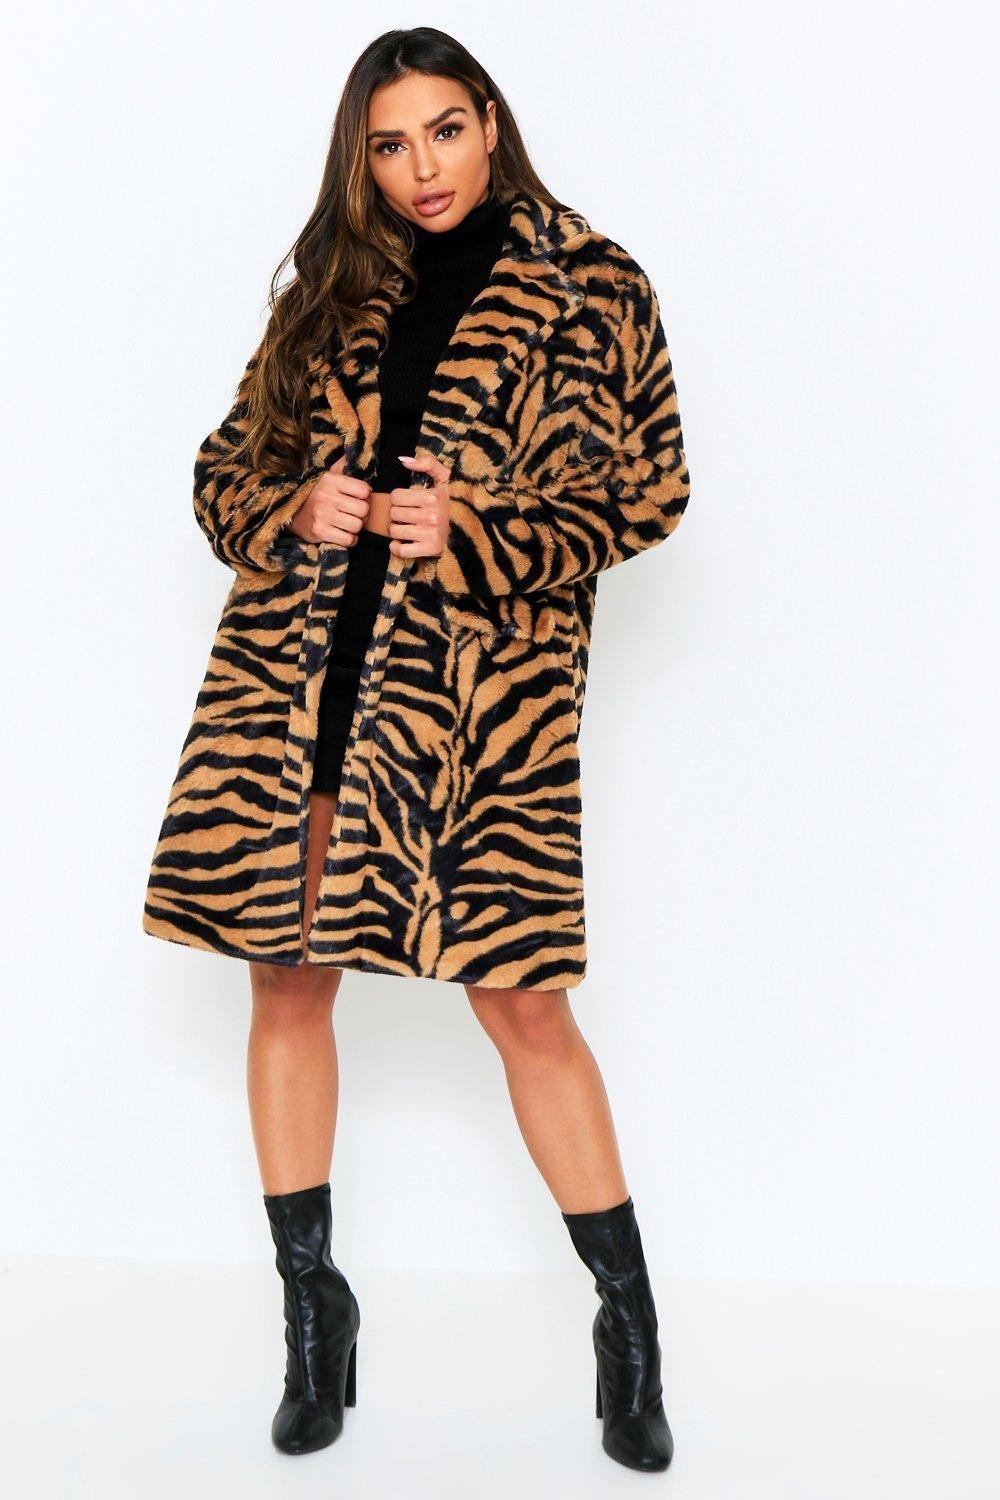 BOOHOO.COM 80% OFF EVERYTHING: 8 winter coats to buy now | Melody Jacob